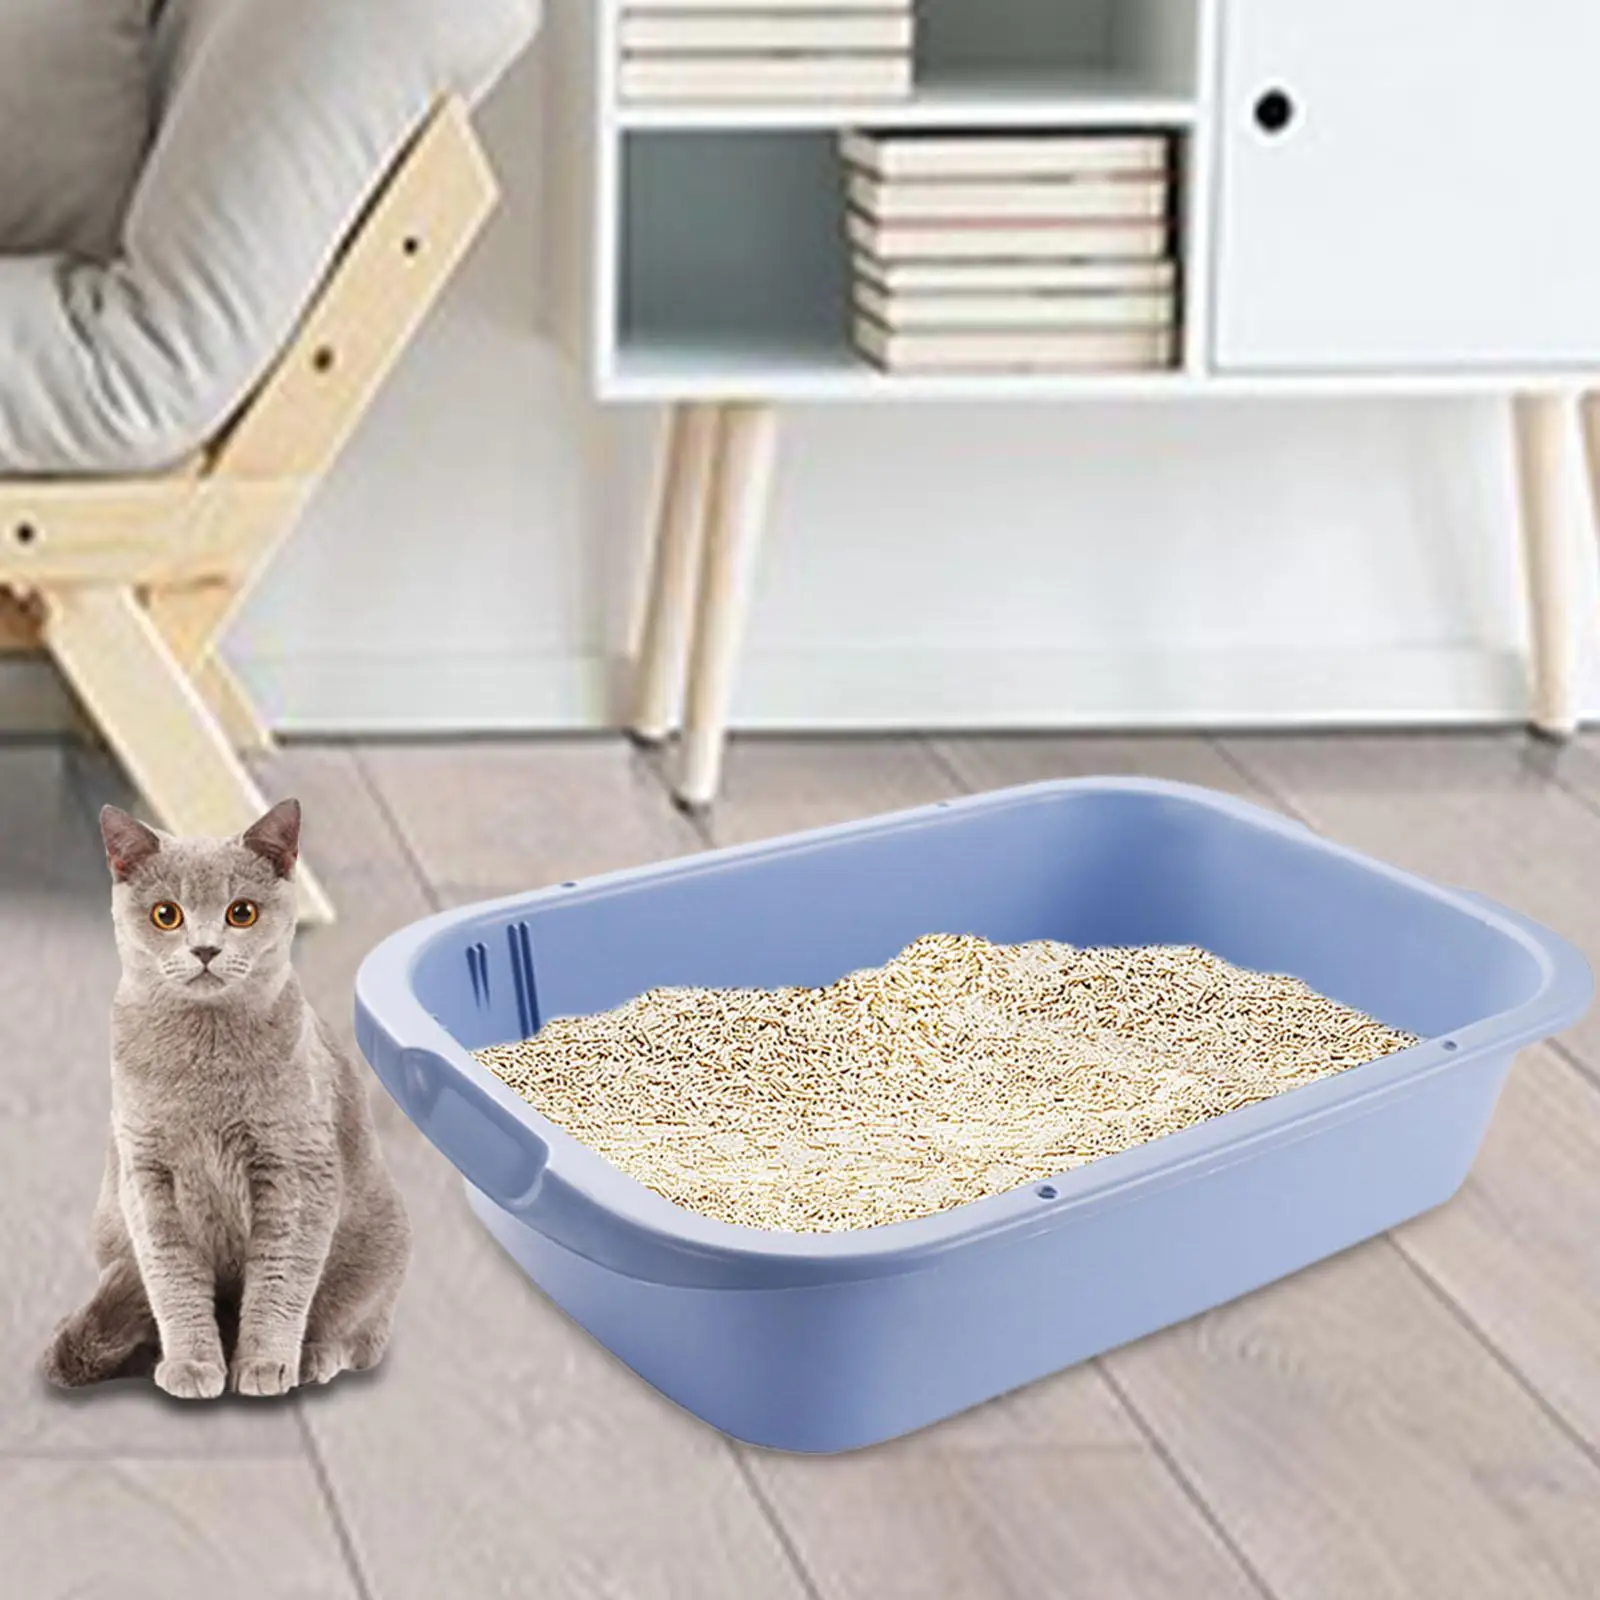 Pet Litter Tray Potty Toilet Toilette Sand Box Container Open Top Cats Litter Box for Small Animals Kitty Indoor Cats Hamsters